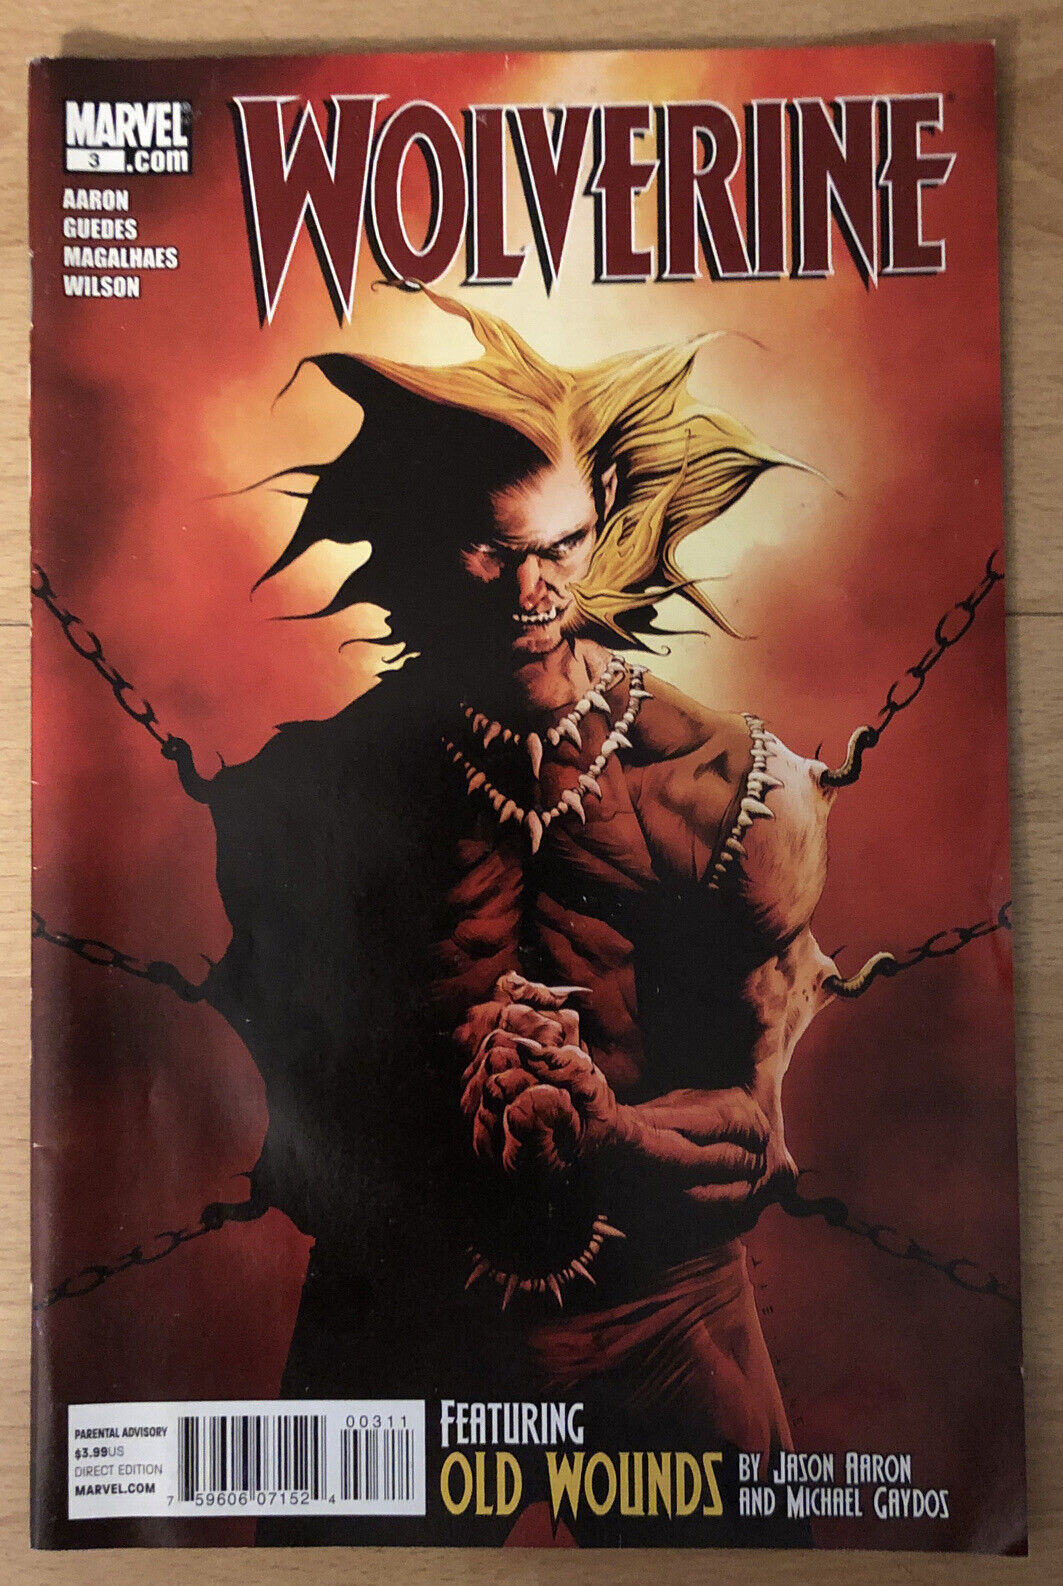 Wolverine 3; Aaron Story, Guedes Art; Spiderman Ghost Rider Cameo; Black Panther